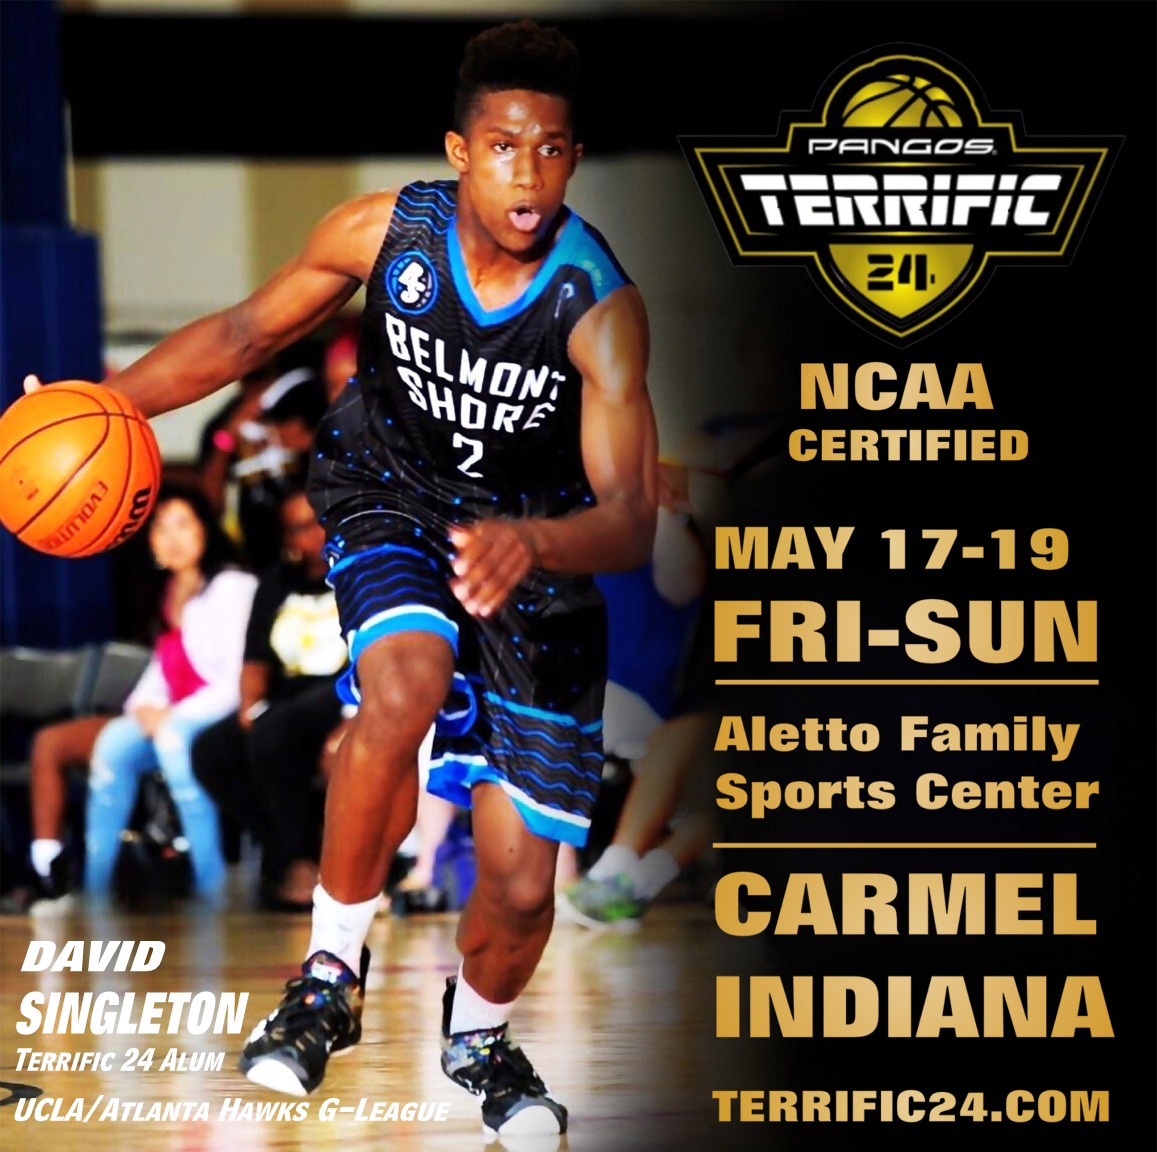 2024 Pangos Terrific 24 near full capacity! NCAA certified event set for May 17-19 at Aletto Family Sports Center/Carmel IN. 24 17u teams, 12 16u teams & 12 15u teams all at one 4 court location 10 min from Nike EYBL that same wkd. All games live-streamed by @BallerTV @FCPPangos